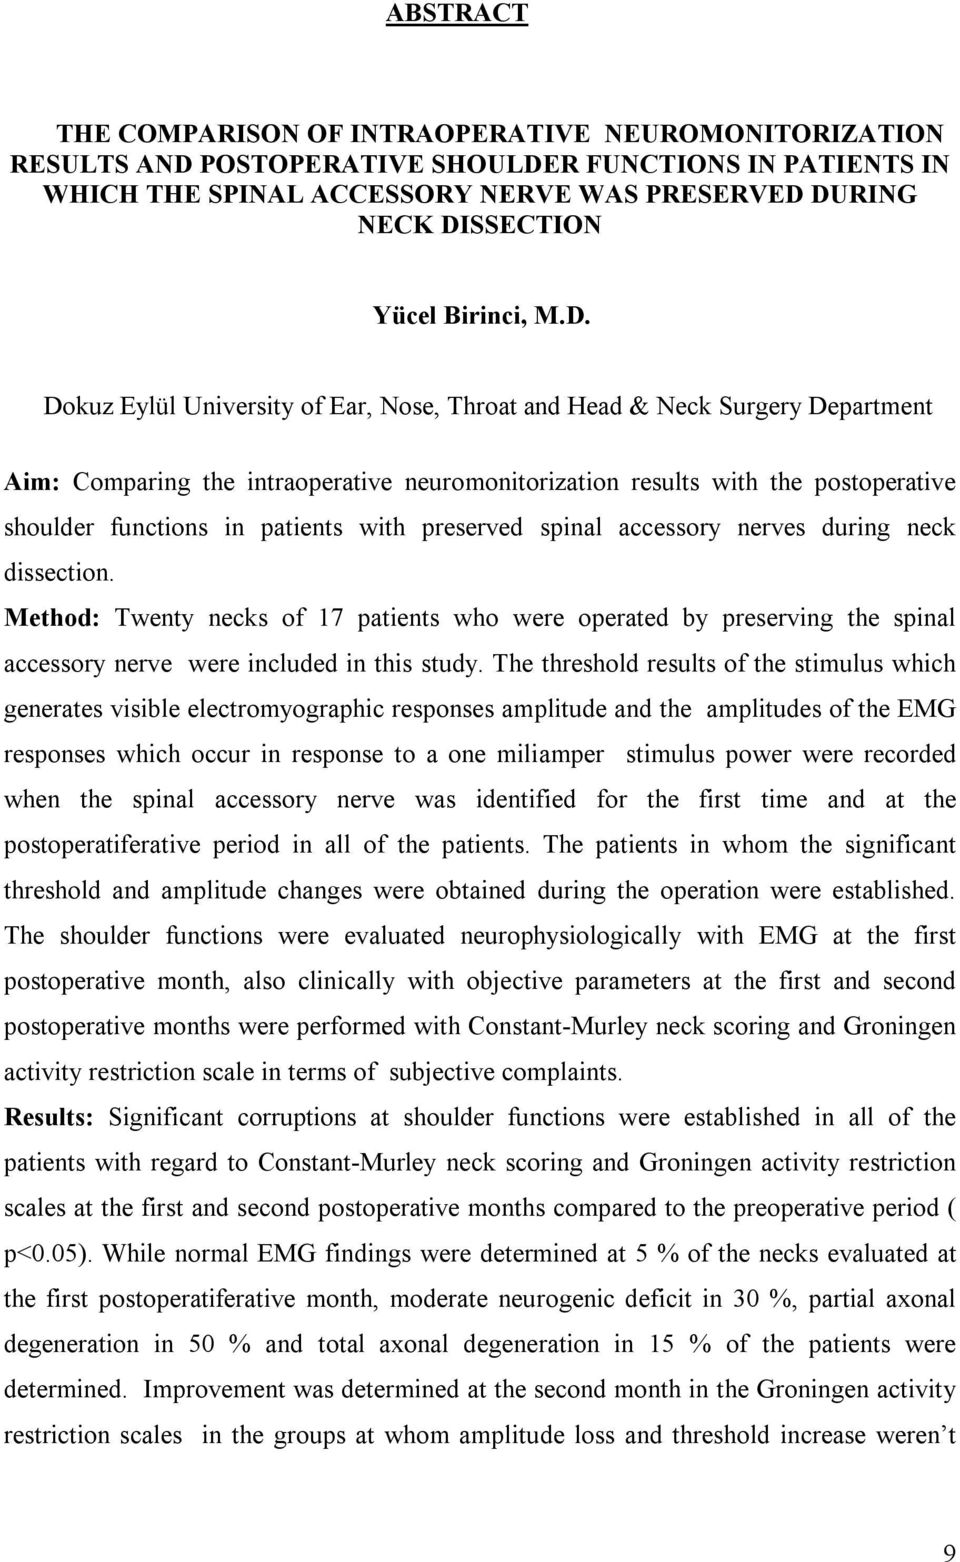 Dokuz Eylül University of Ear, Nose, Throat and Head & Neck Surgery Department Aim: Comparing the intraoperative neuromonitorization results with the postoperative shoulder functions in patients with